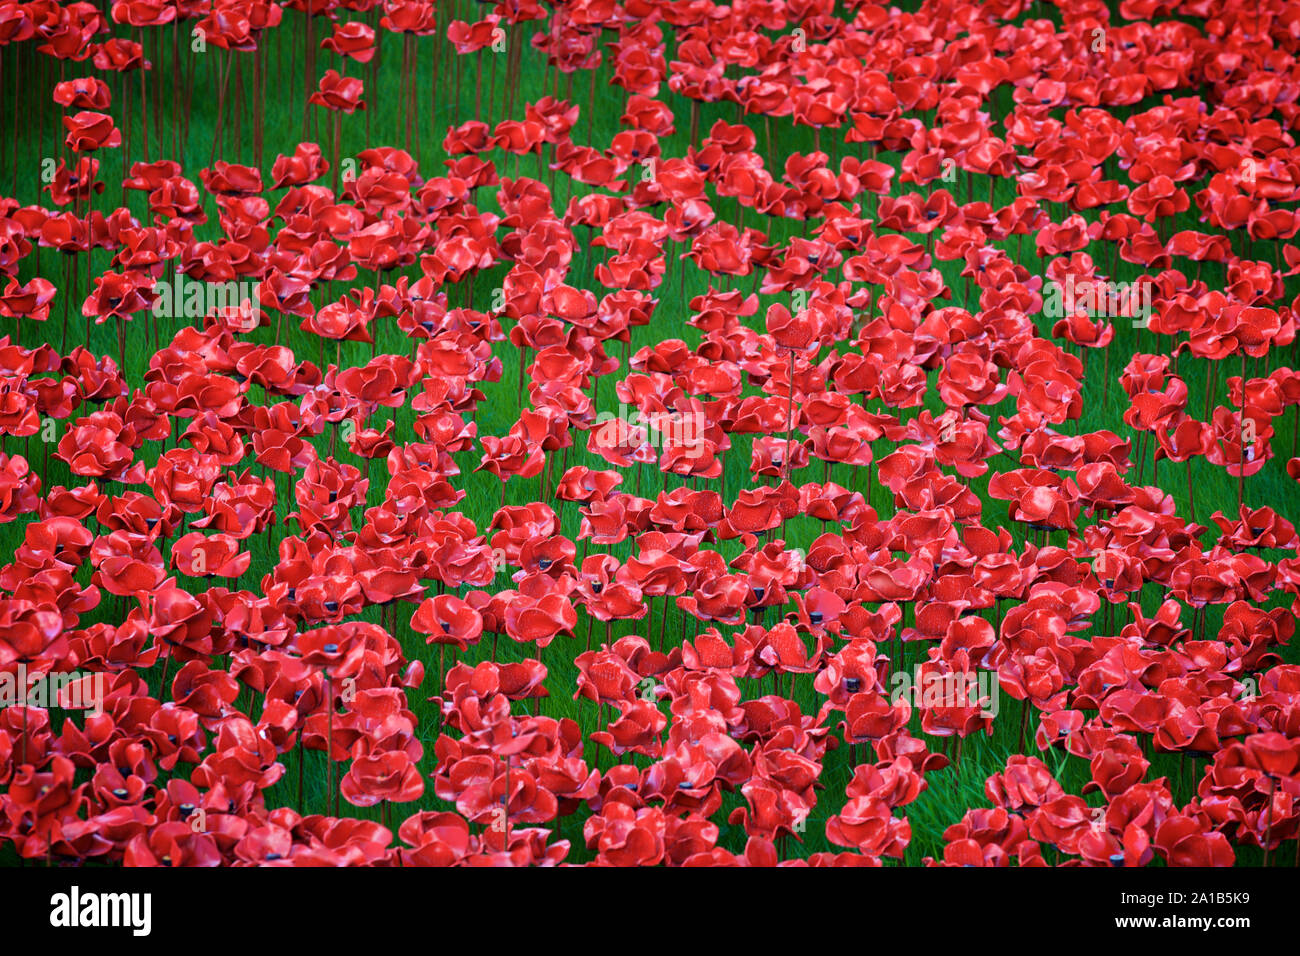 Blood Swept Lands and Seas of Red installation at The Tower of London marking 100 years since the 1st World War. Stock Photo